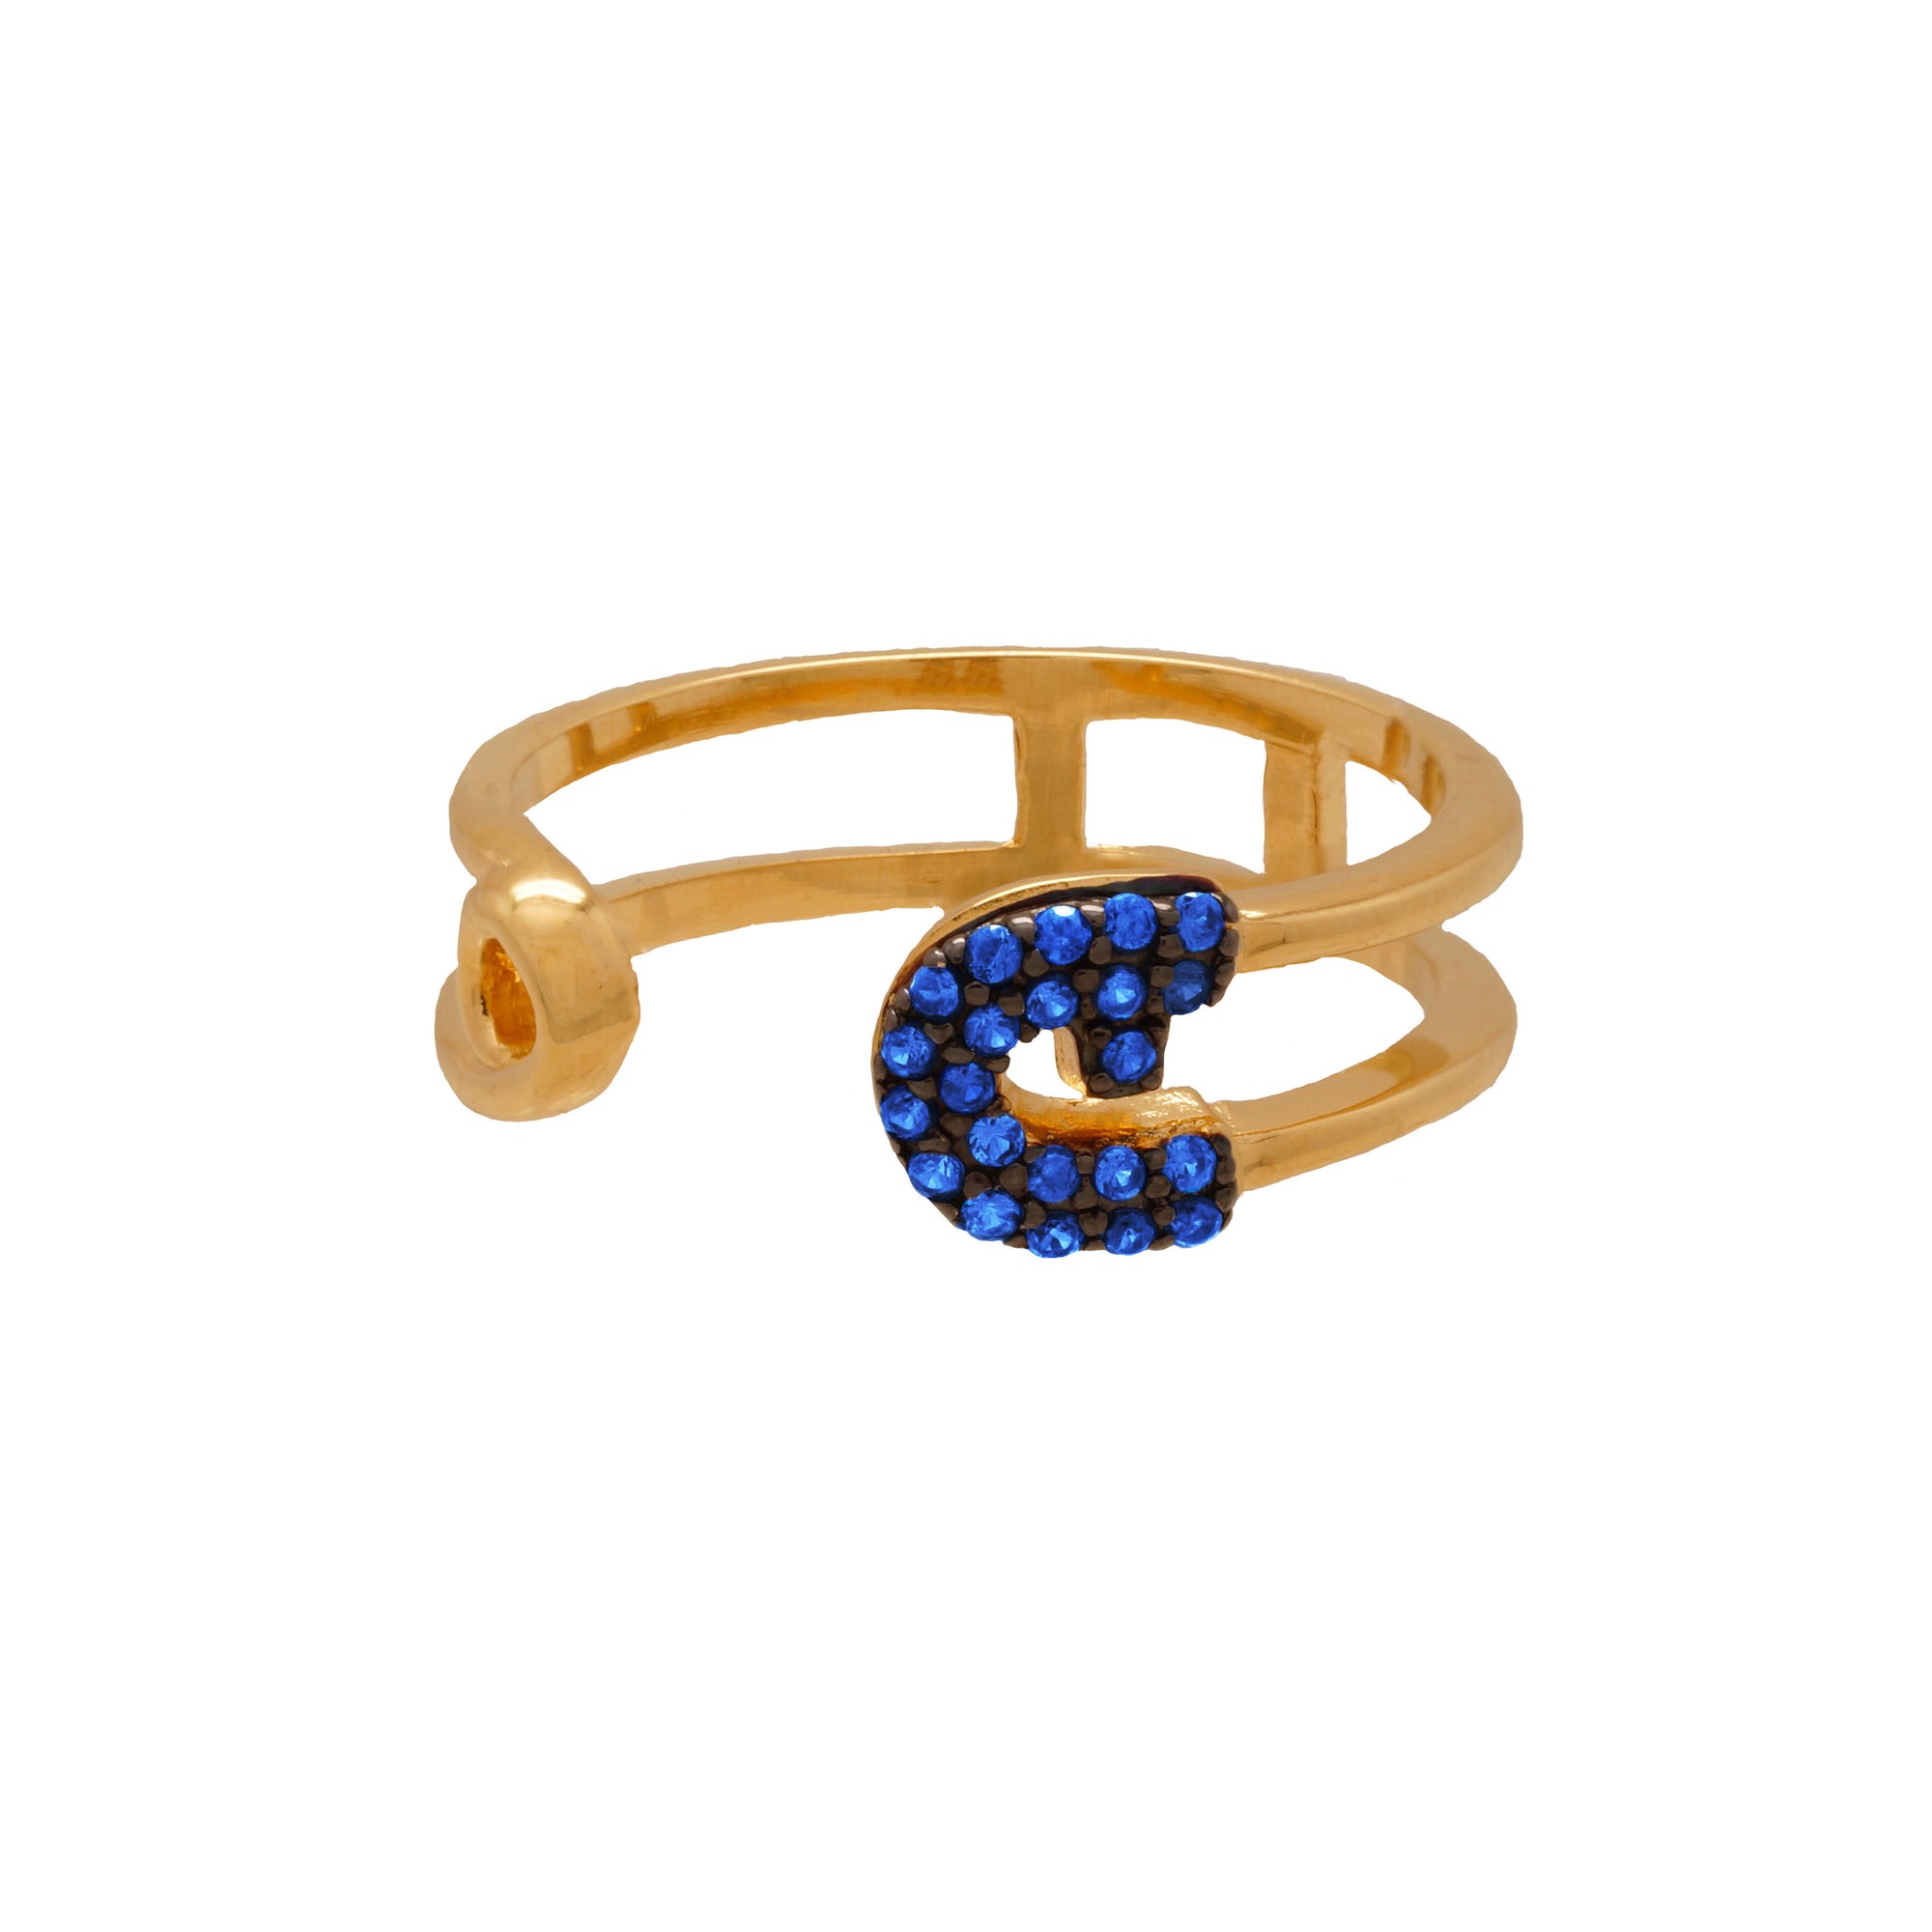 Reborn Safety Pin Bling Yellow Gold Ring - Carrie K. 